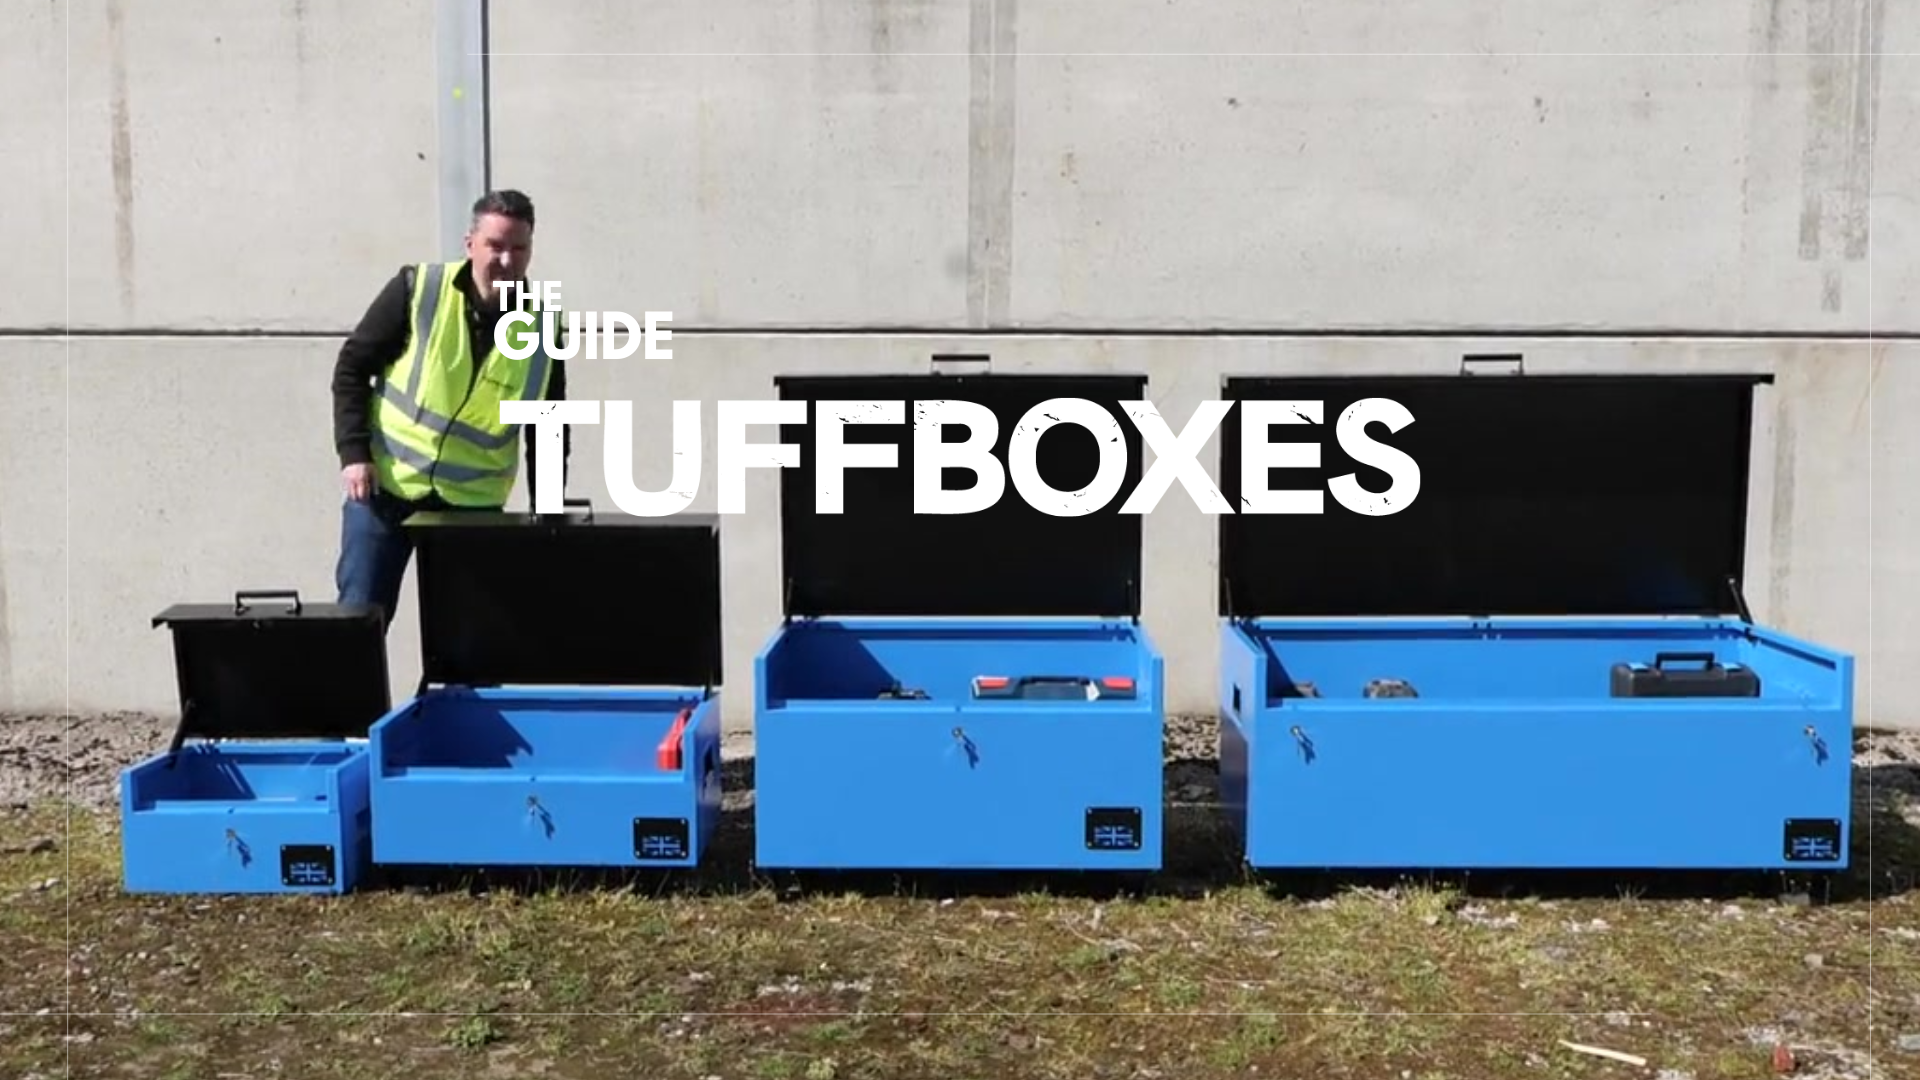 Load video: A guide to Tuffboxes